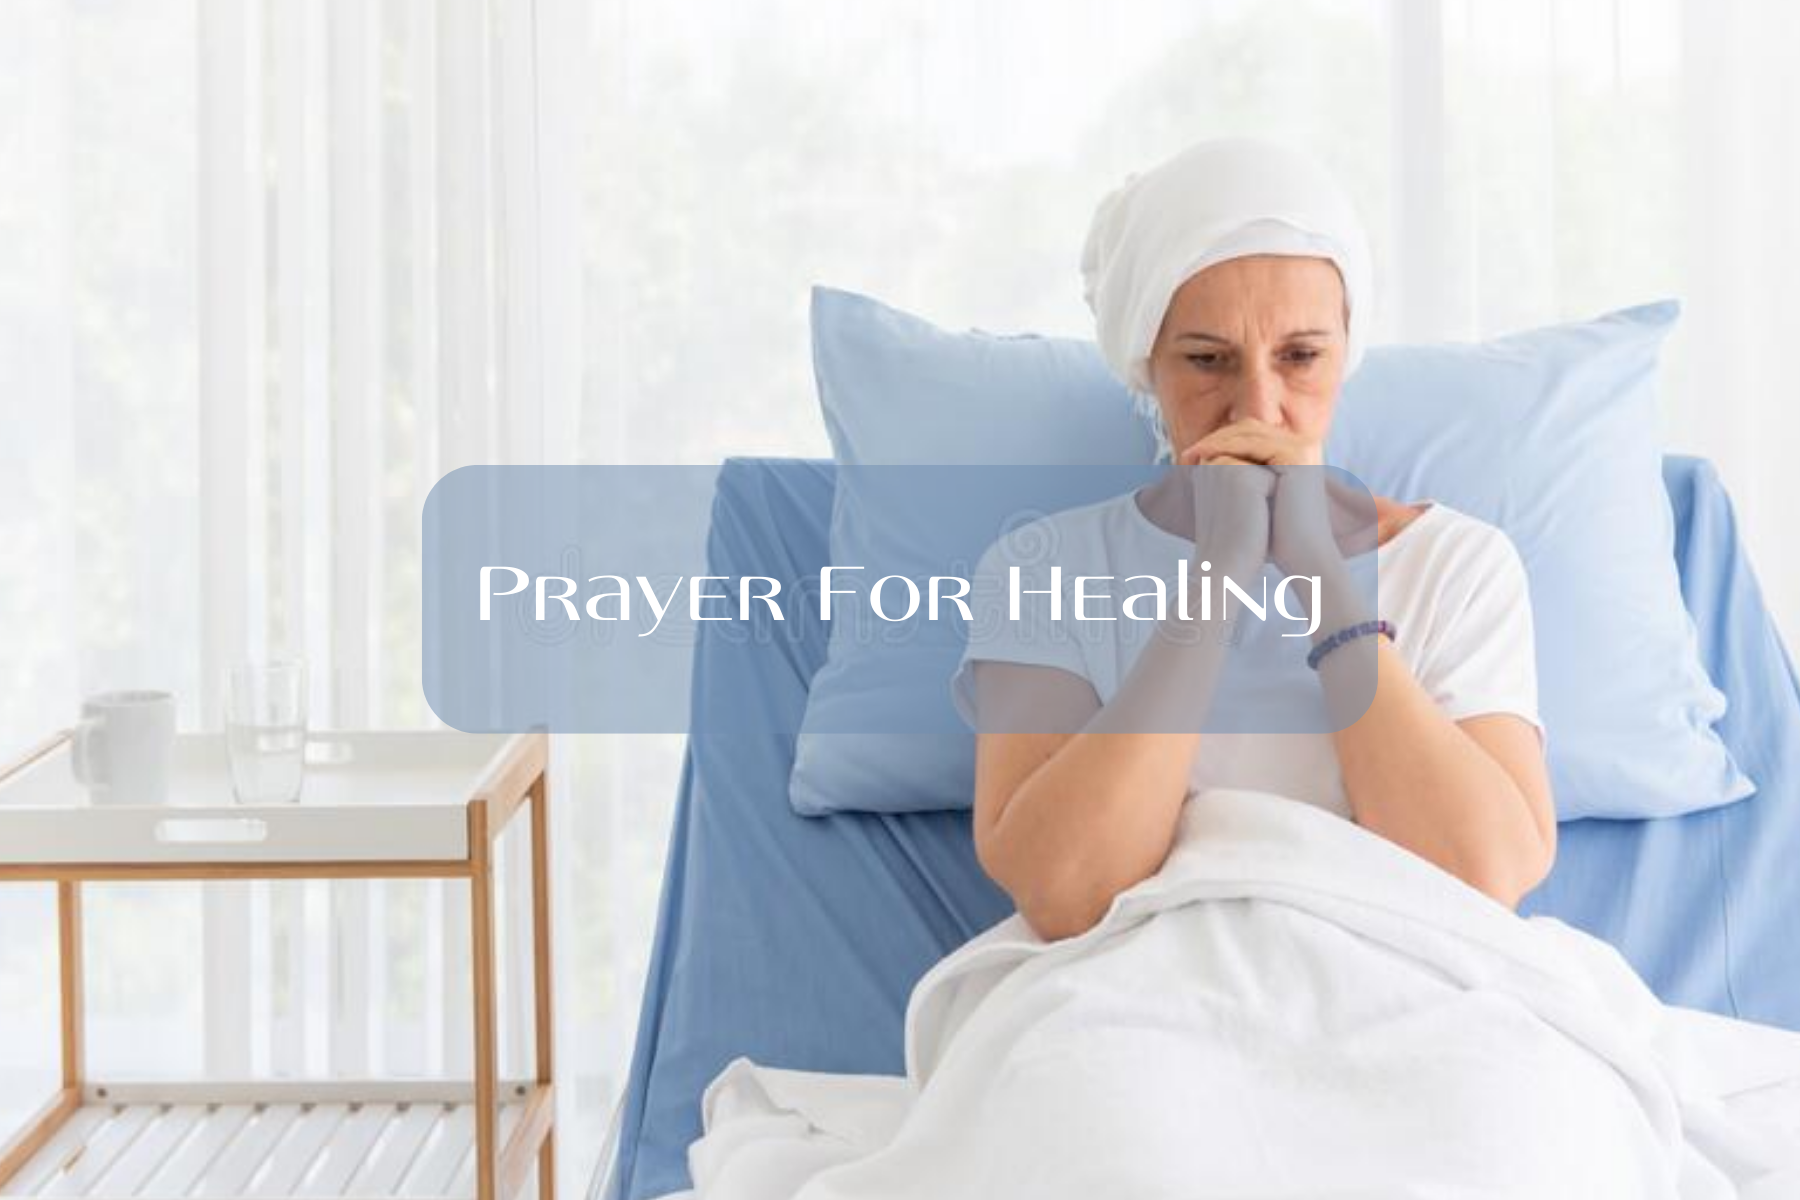 A woman prays to recover quickly from surgery